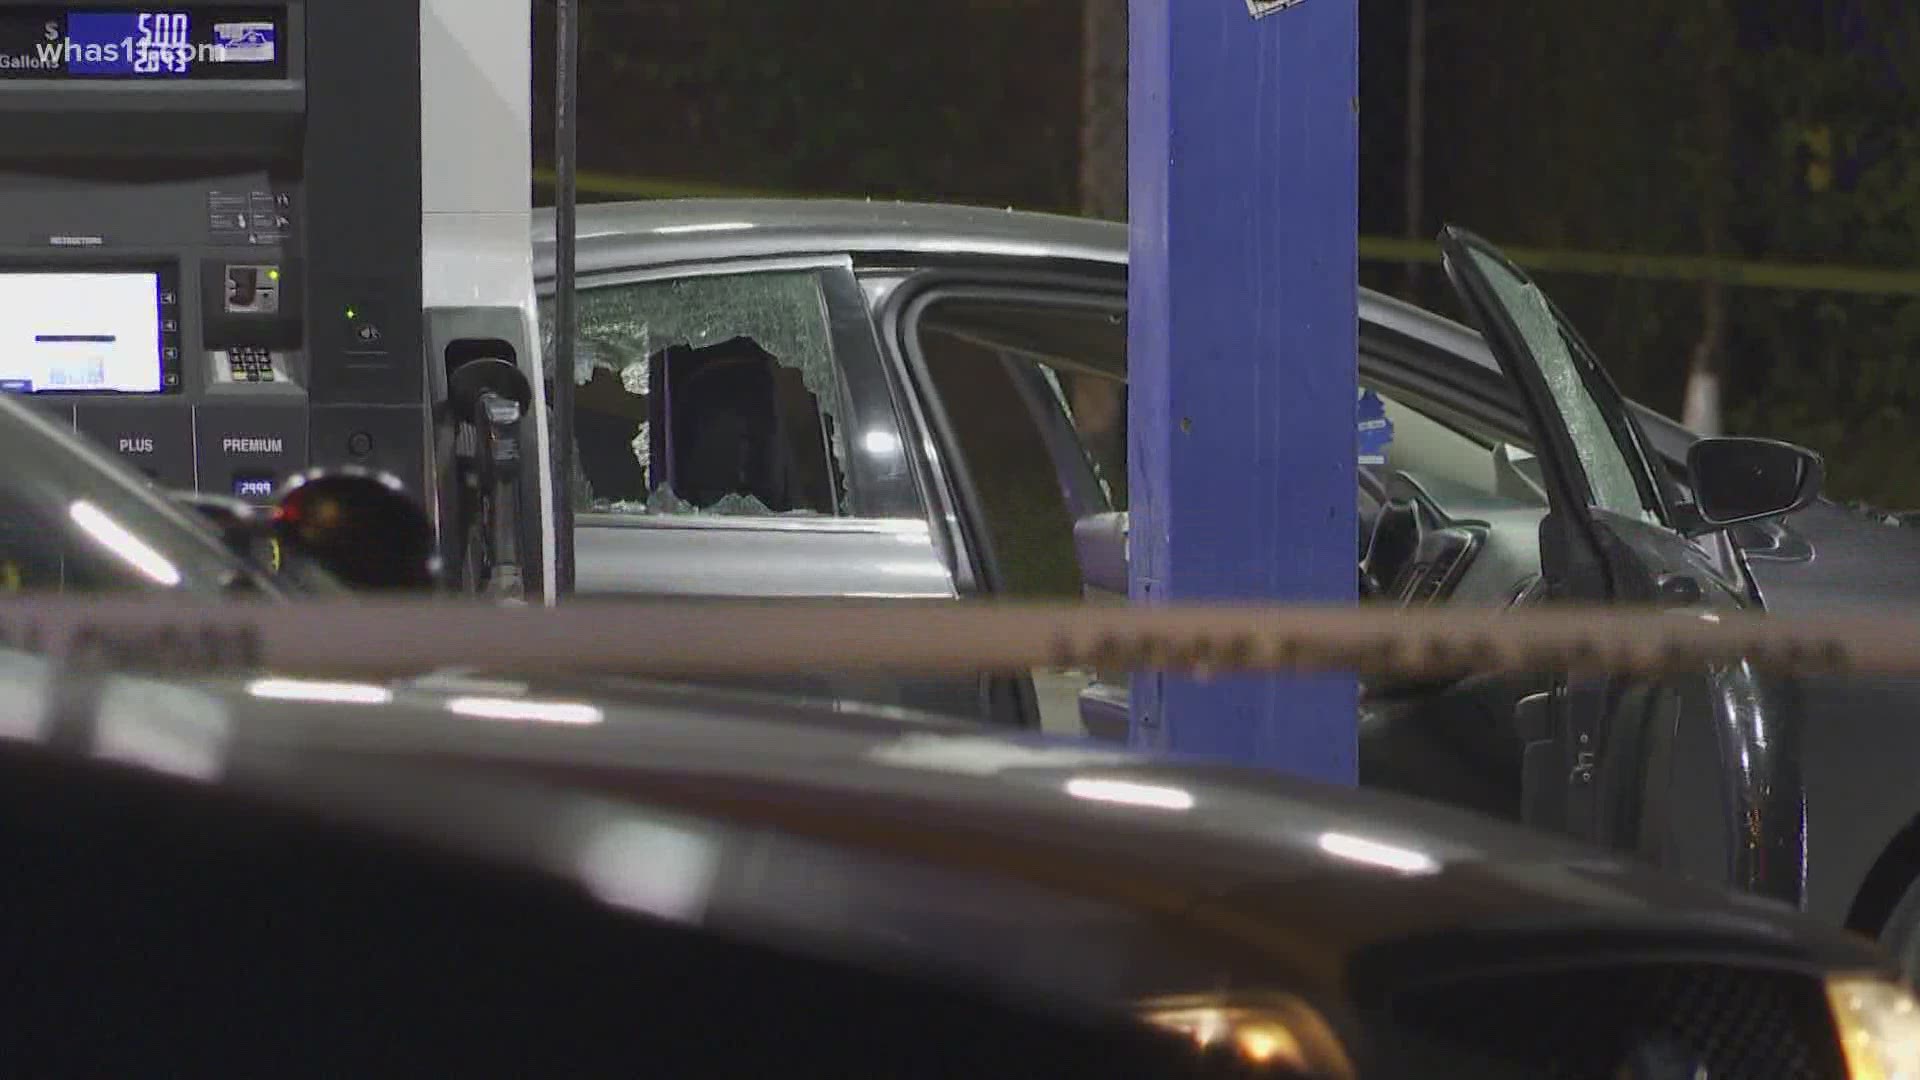 A man was shot outside a Marathon gas station in the 1500 block of South Shelby Street.